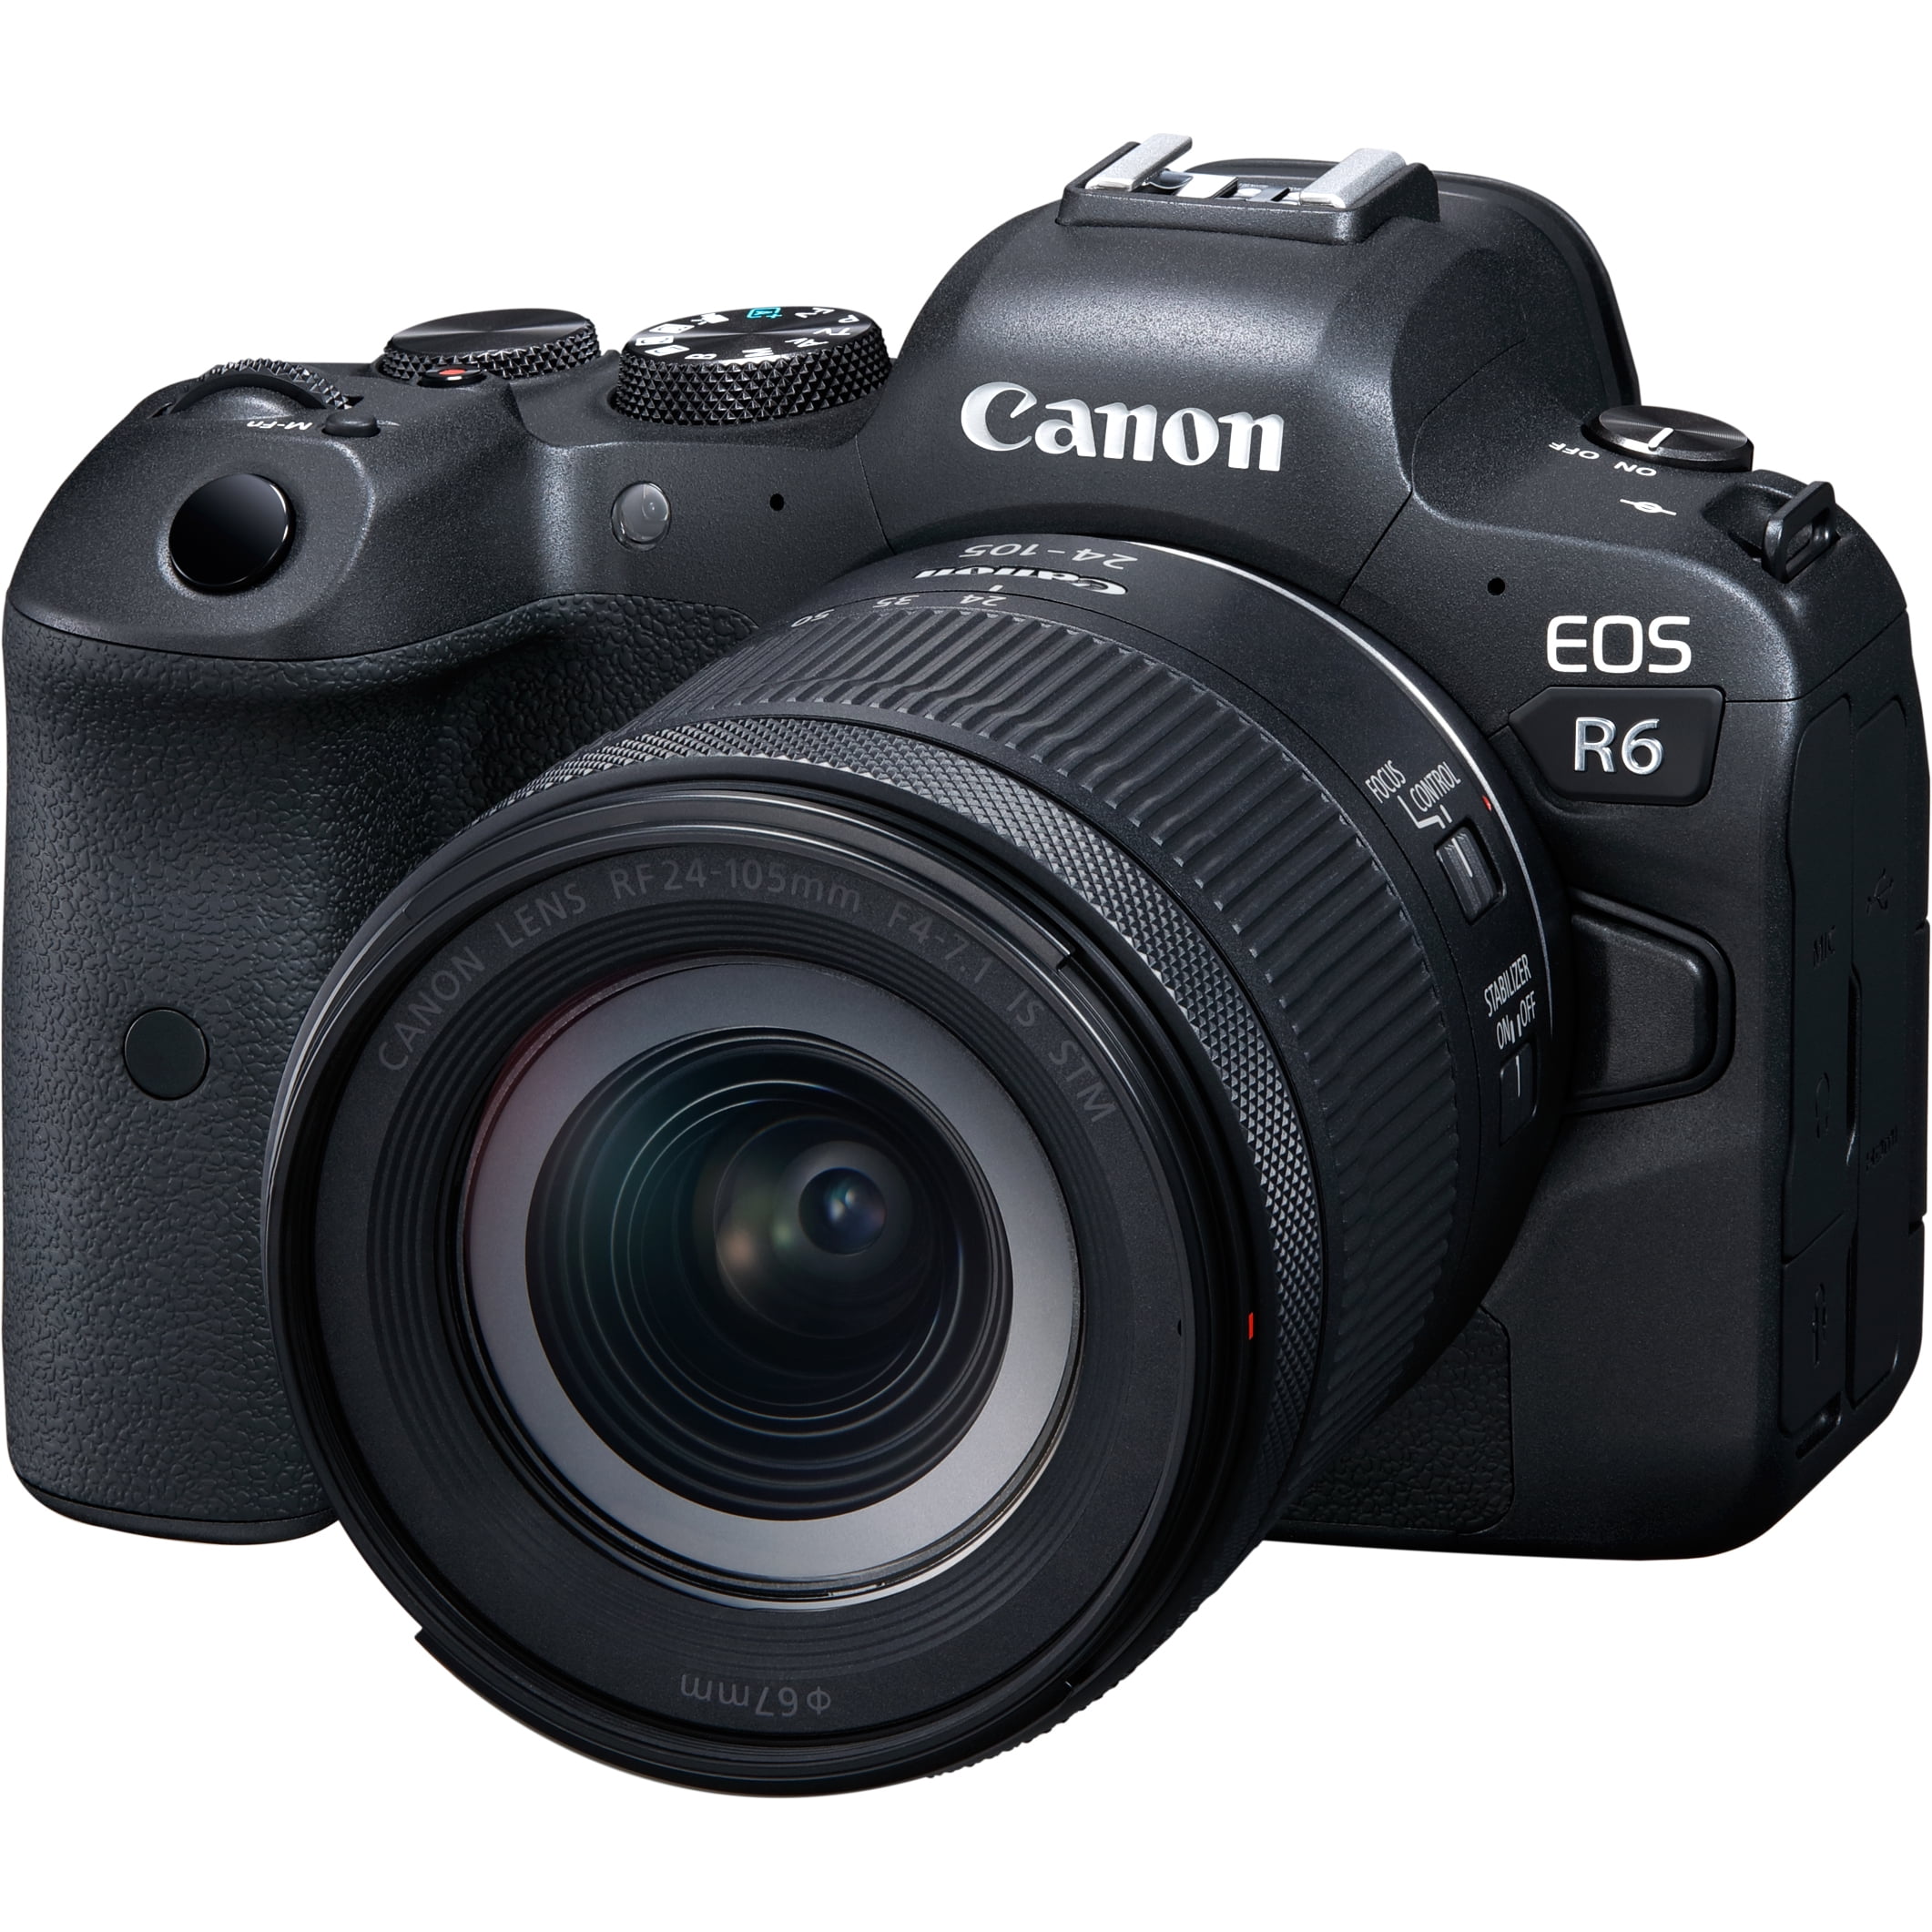 Canon EOS R6 20.1 Megapixel Mirrorless Camera with Lens, 0.94, 4.13